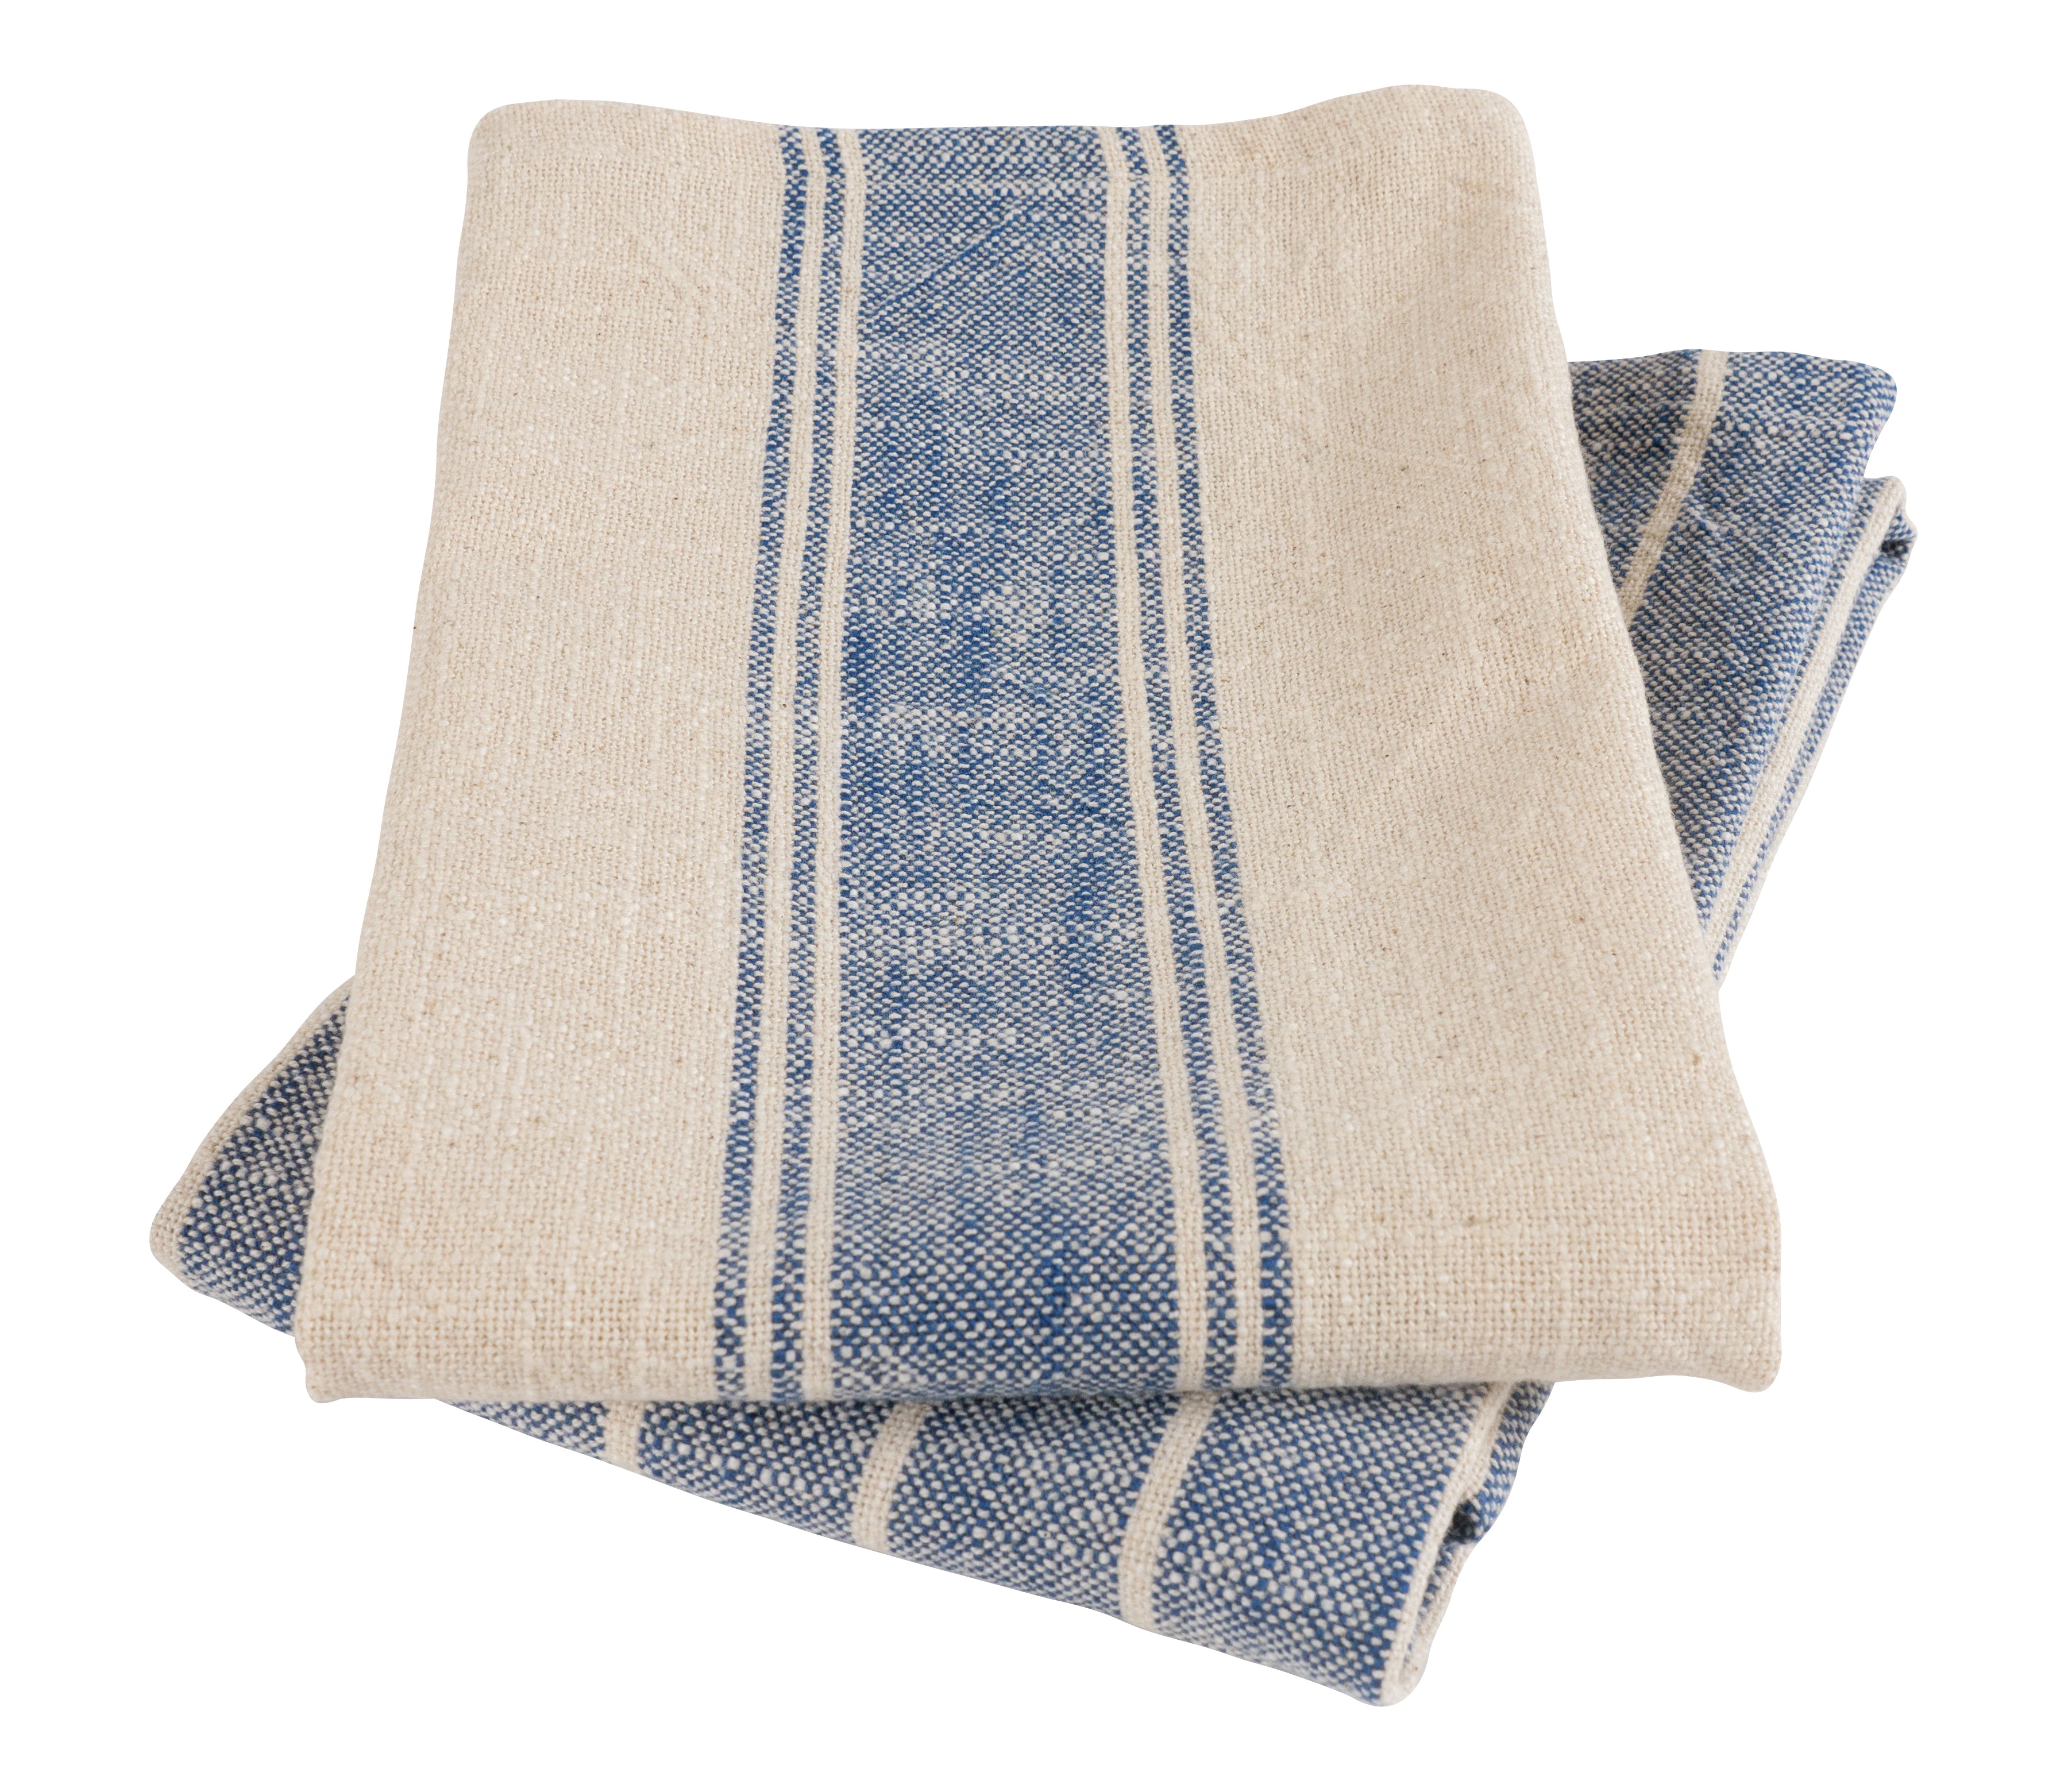 Bedford Home 69A-39376 16 x 28 in. Home Kitchen Dish Towels, Multi